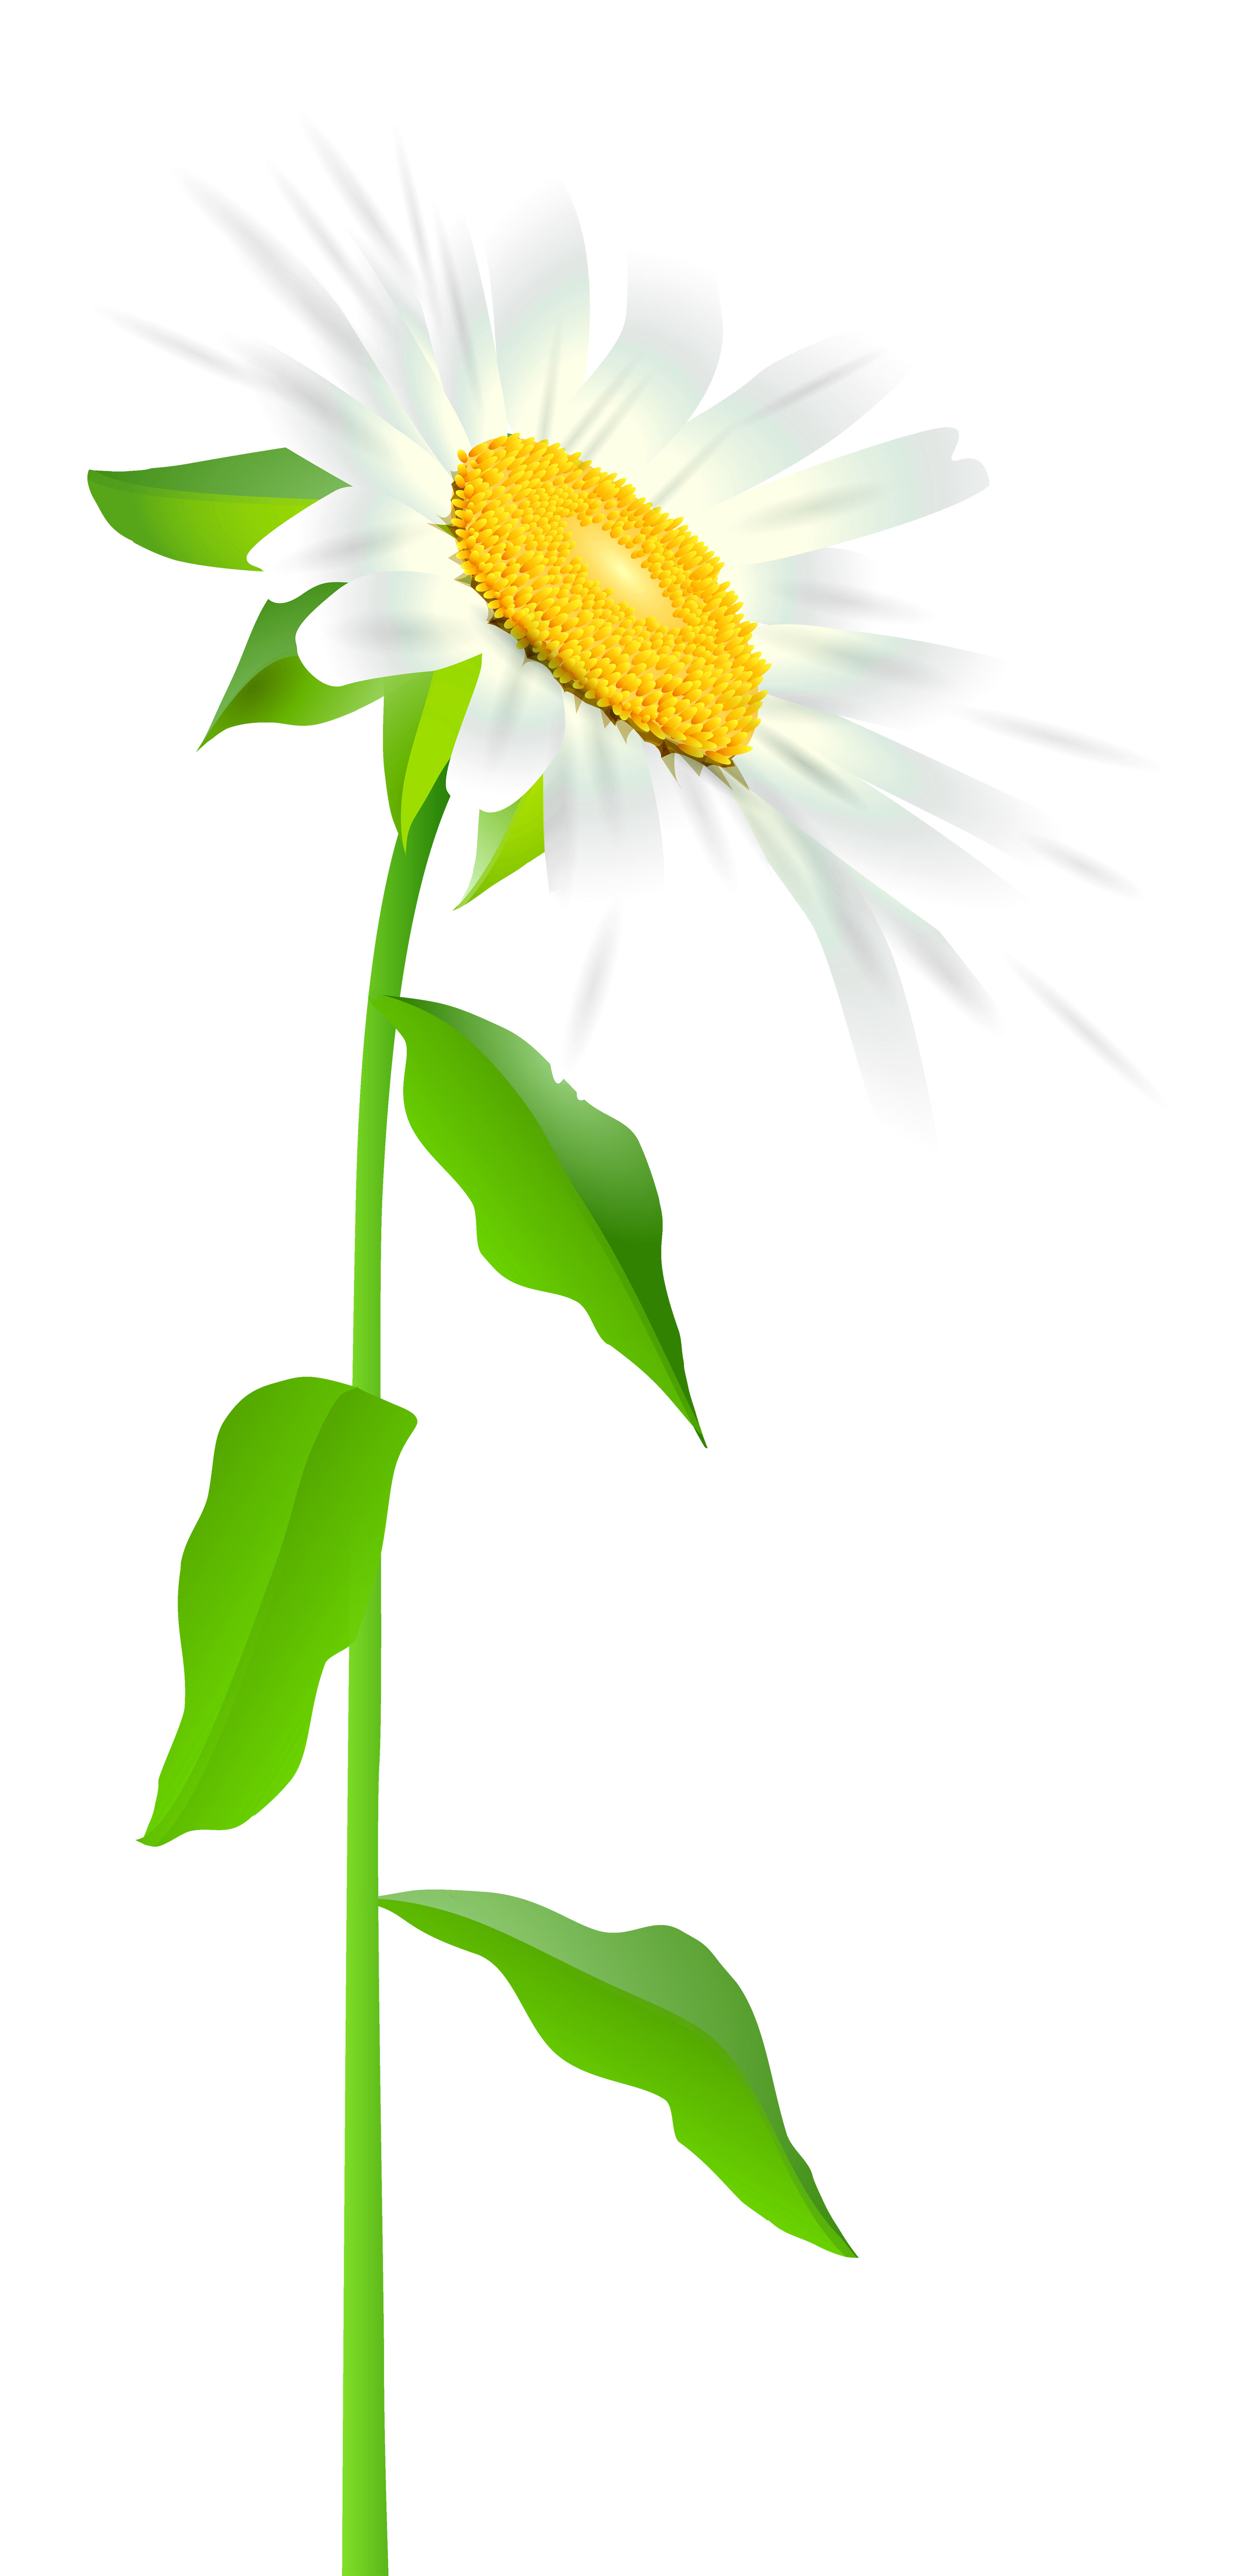 Daisy with Stem Transparent PNG Clip Art Image.